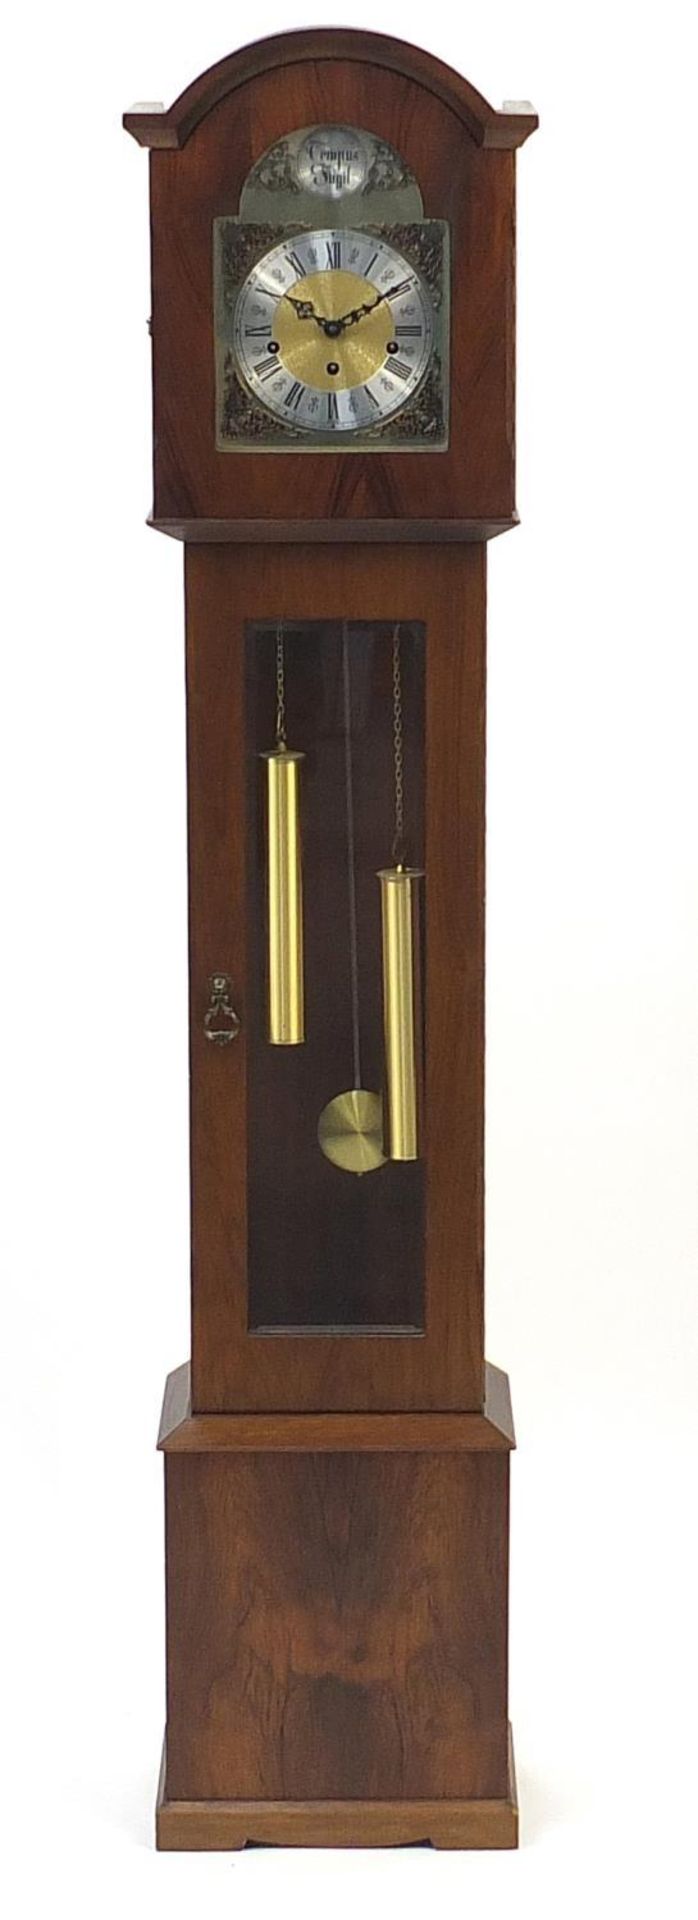 Tempest Fugit granddaughter clock with visible weights and pendulum, 149cm high